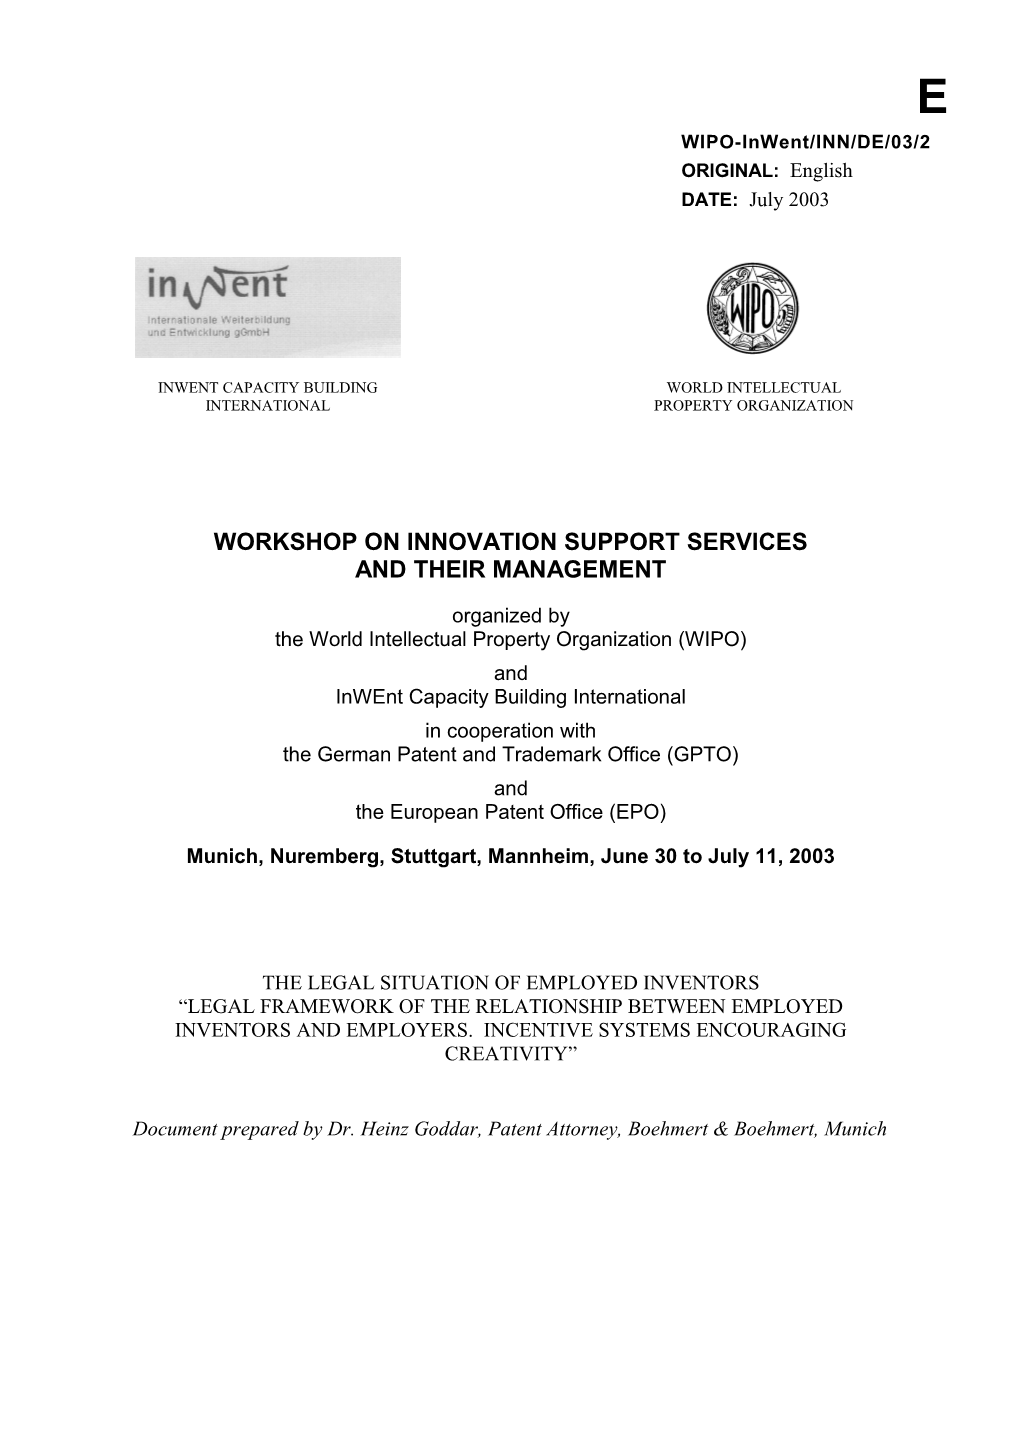 WIPO-INWENT/INN/DE/03/2: the Legal Situation of Employed Inventors Legal Framework of The